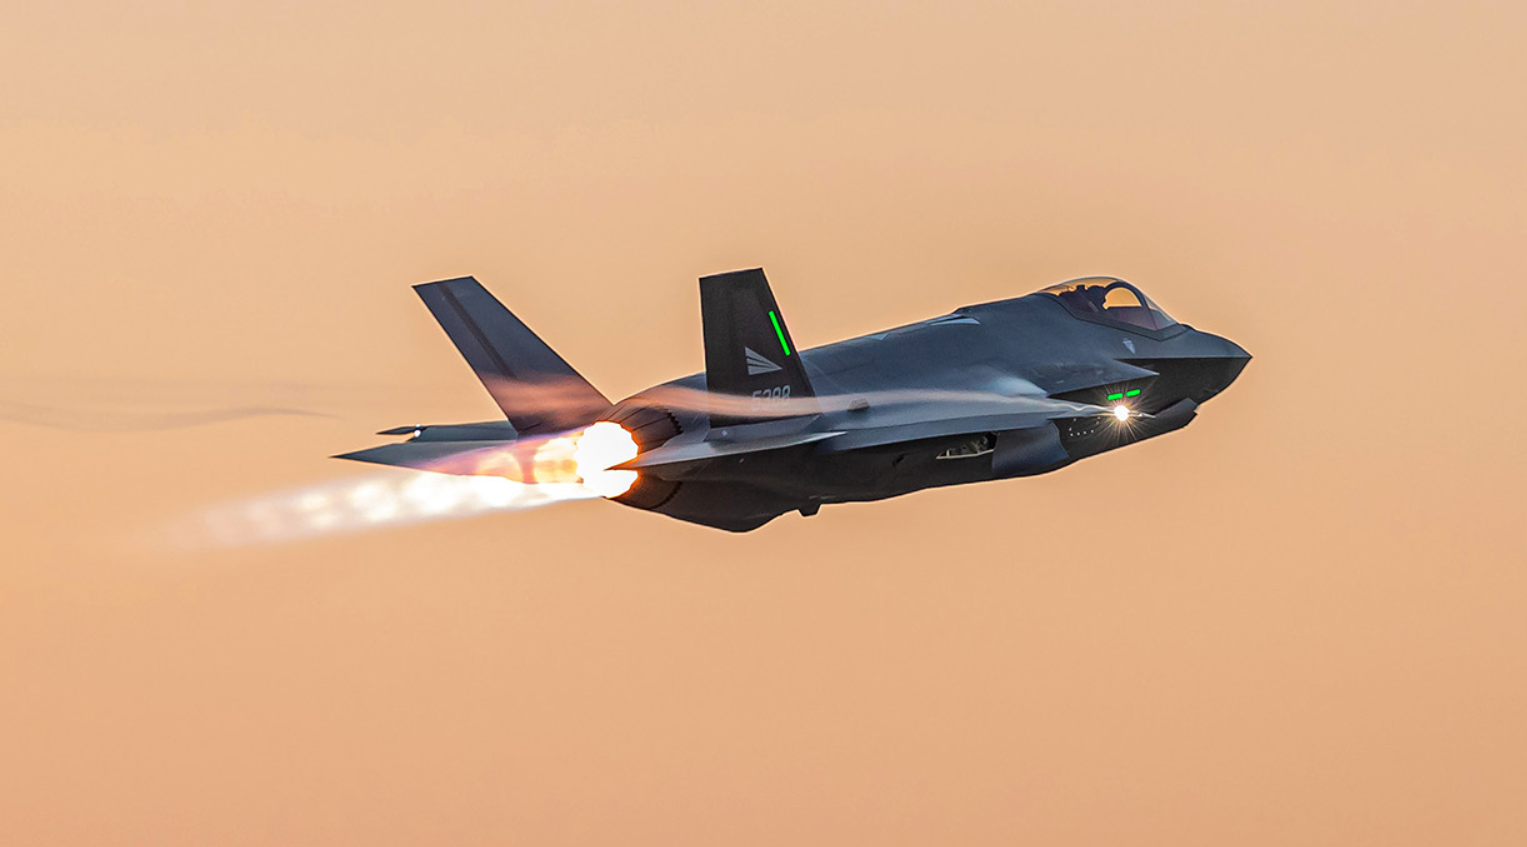 A black Royal Norwegian Air Force F-35 plane is seen flying in an orange, sunset-tinged sky. The plane's wing has "5388" painted on it in white. A trail of red-hot jet flames is seen coming out of its back.